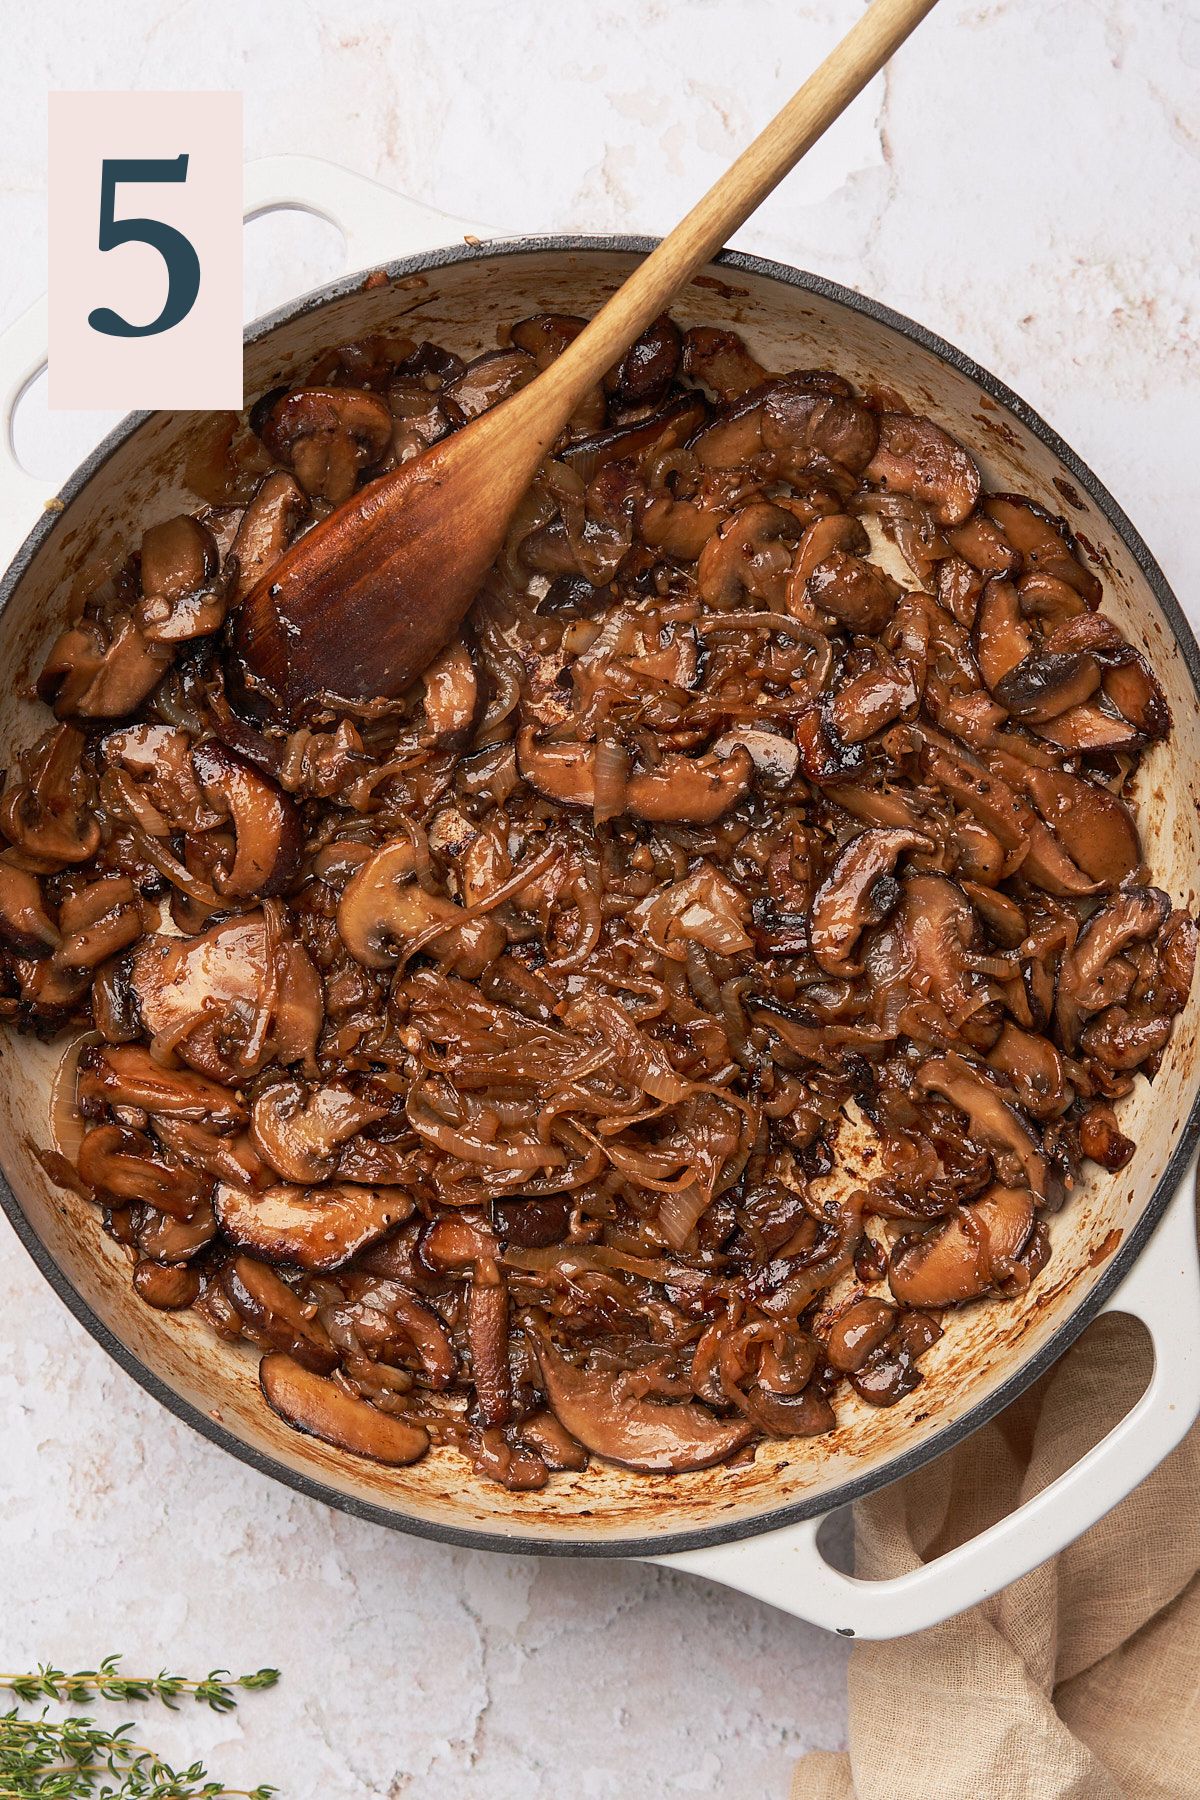 caramelized onions and mushrooms in an enameled cast iron skillet.